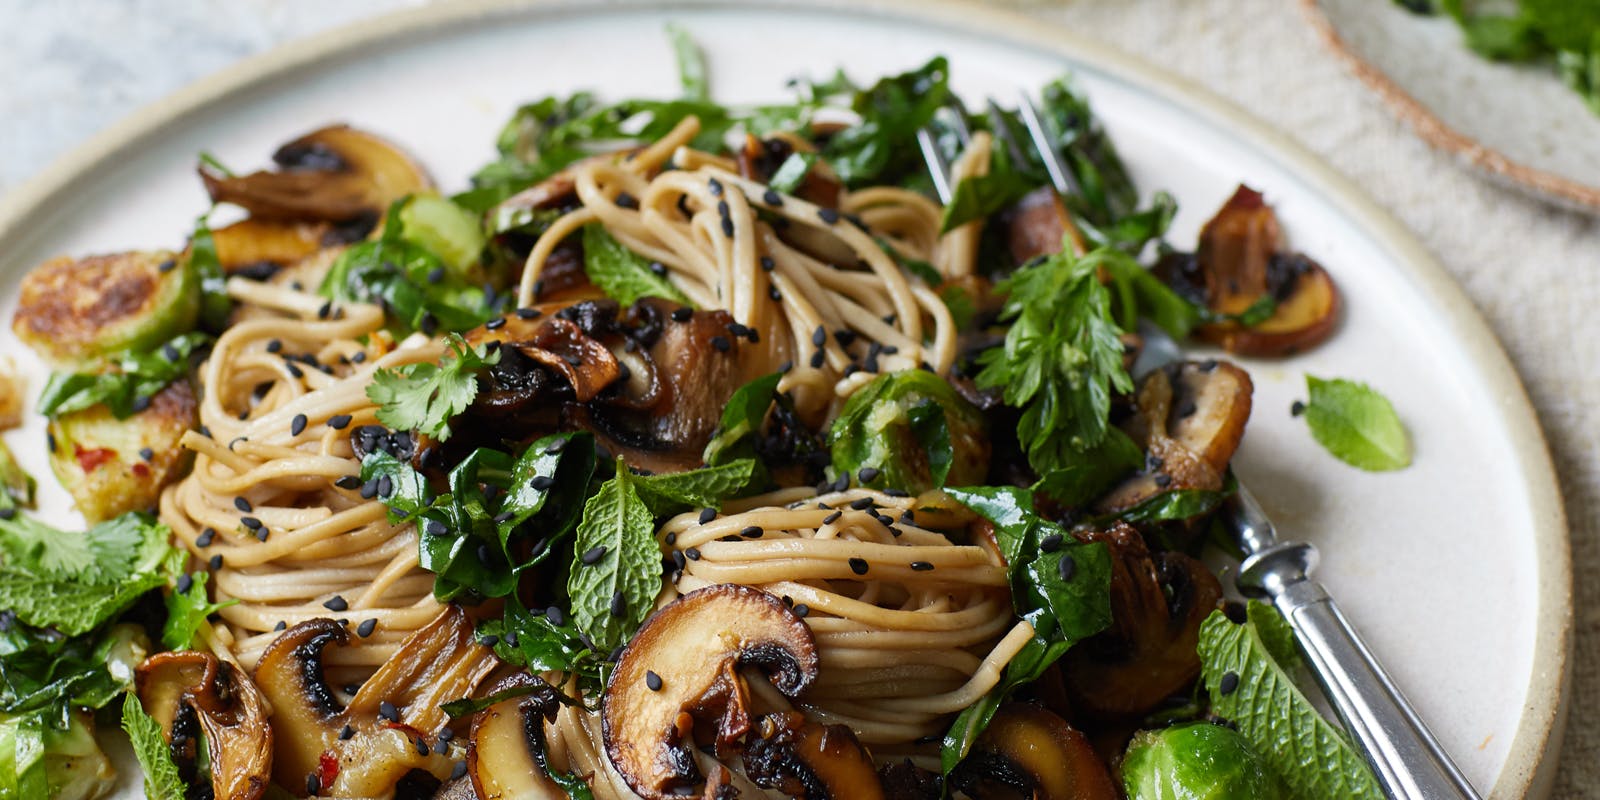 Spicy sprout and mushroom noodles with five-spice